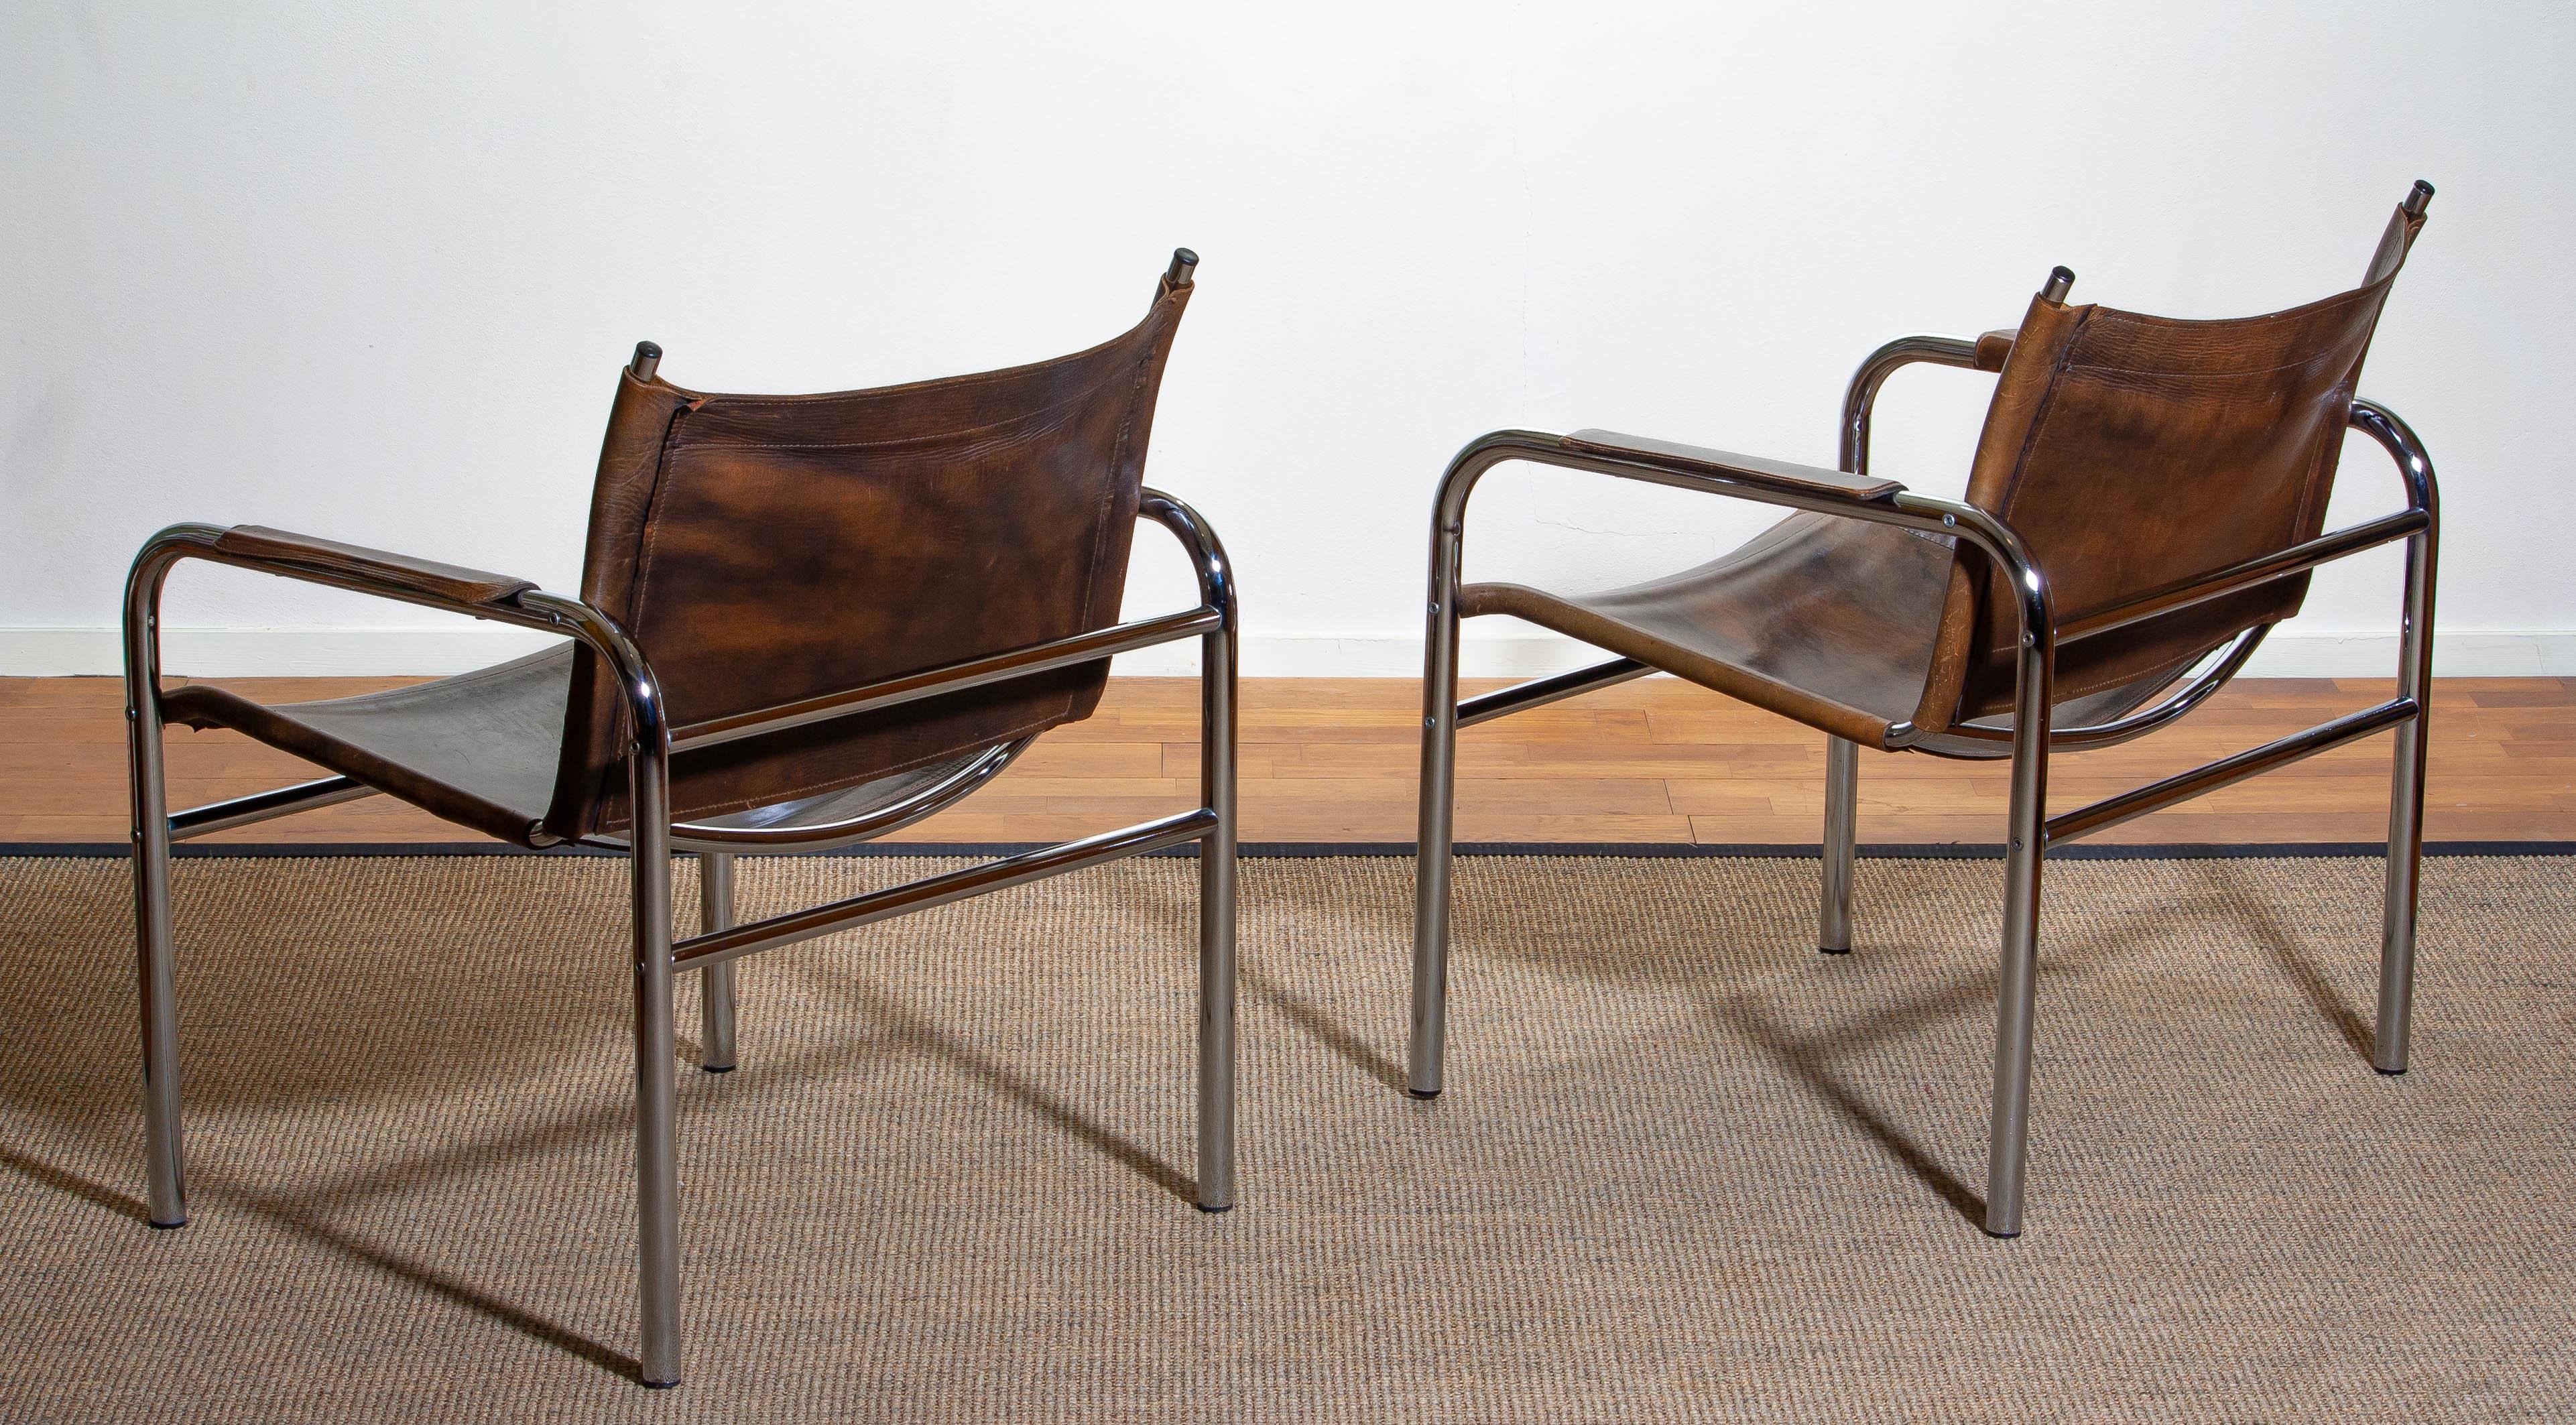 1980s, Pair of Leather and Tubular Steel Armchairs by Tord Bjorklund, Sweden 7